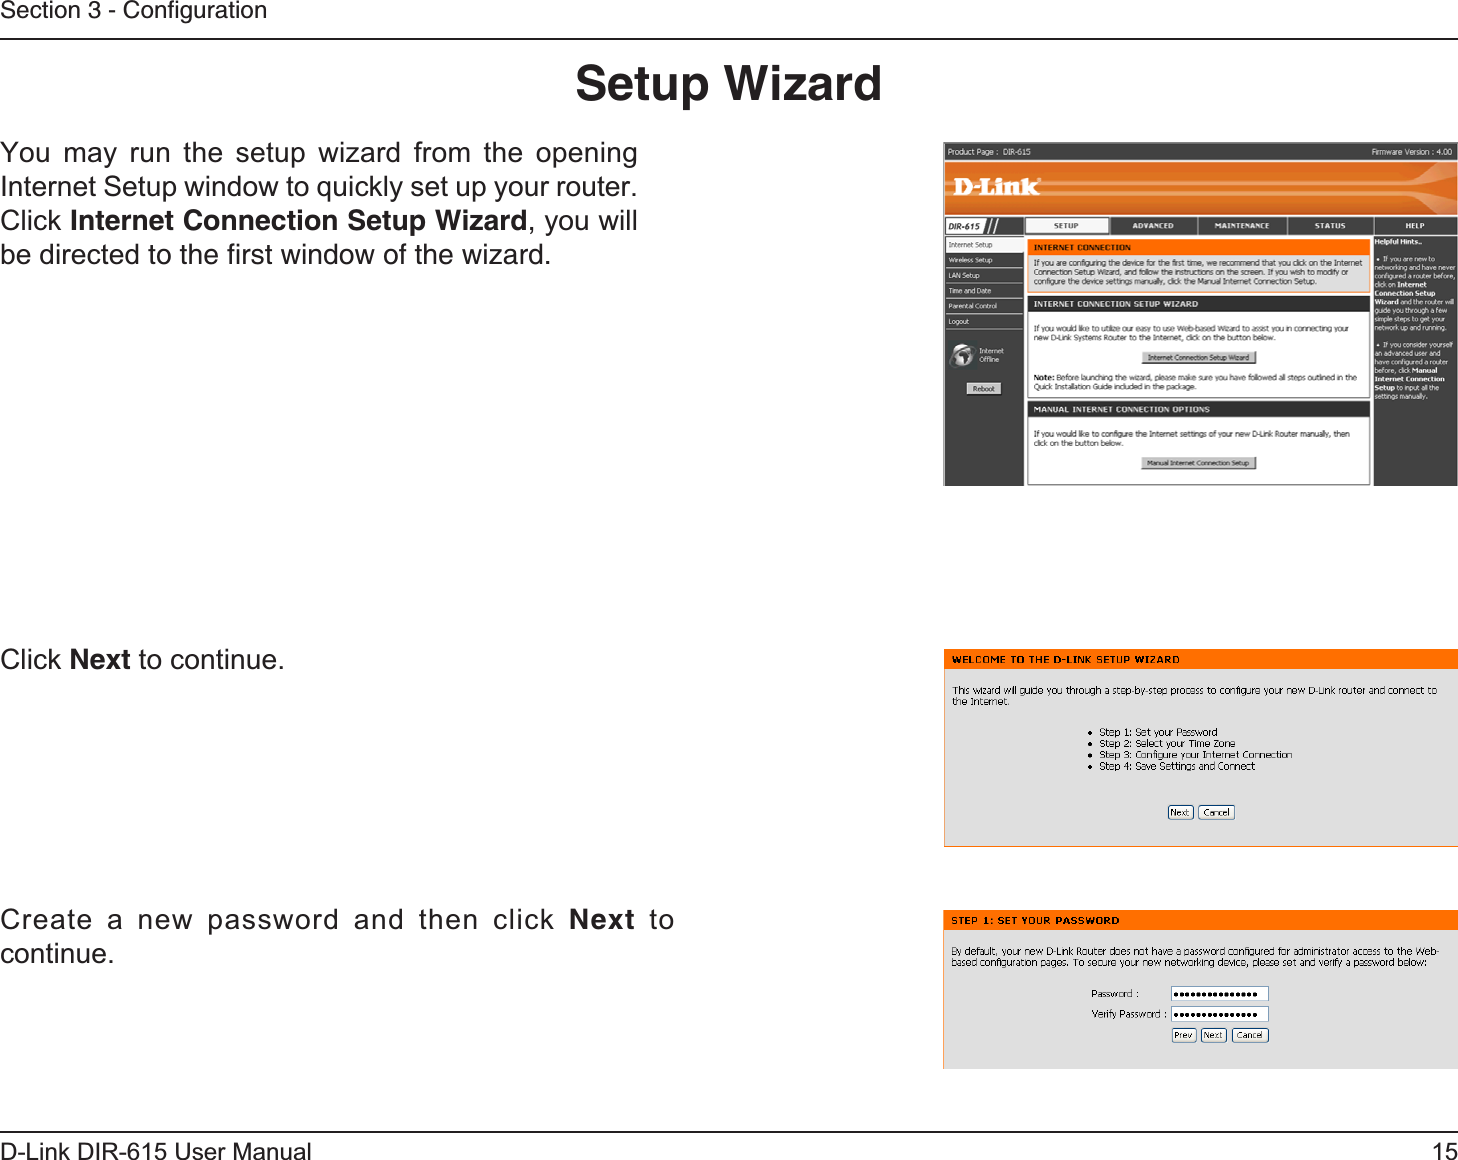 15D-Link DIR-615 User ManualSection 3 - ConﬁgurationSetup WizardYou may run the setup wizard from the opening Internet Setup window to quickly set up your router. Click Internet Connection Setup Wizard,you will be directed to the ﬁrst window of the wizard.Click Next to continue.Create a new password and then click Next to continue.